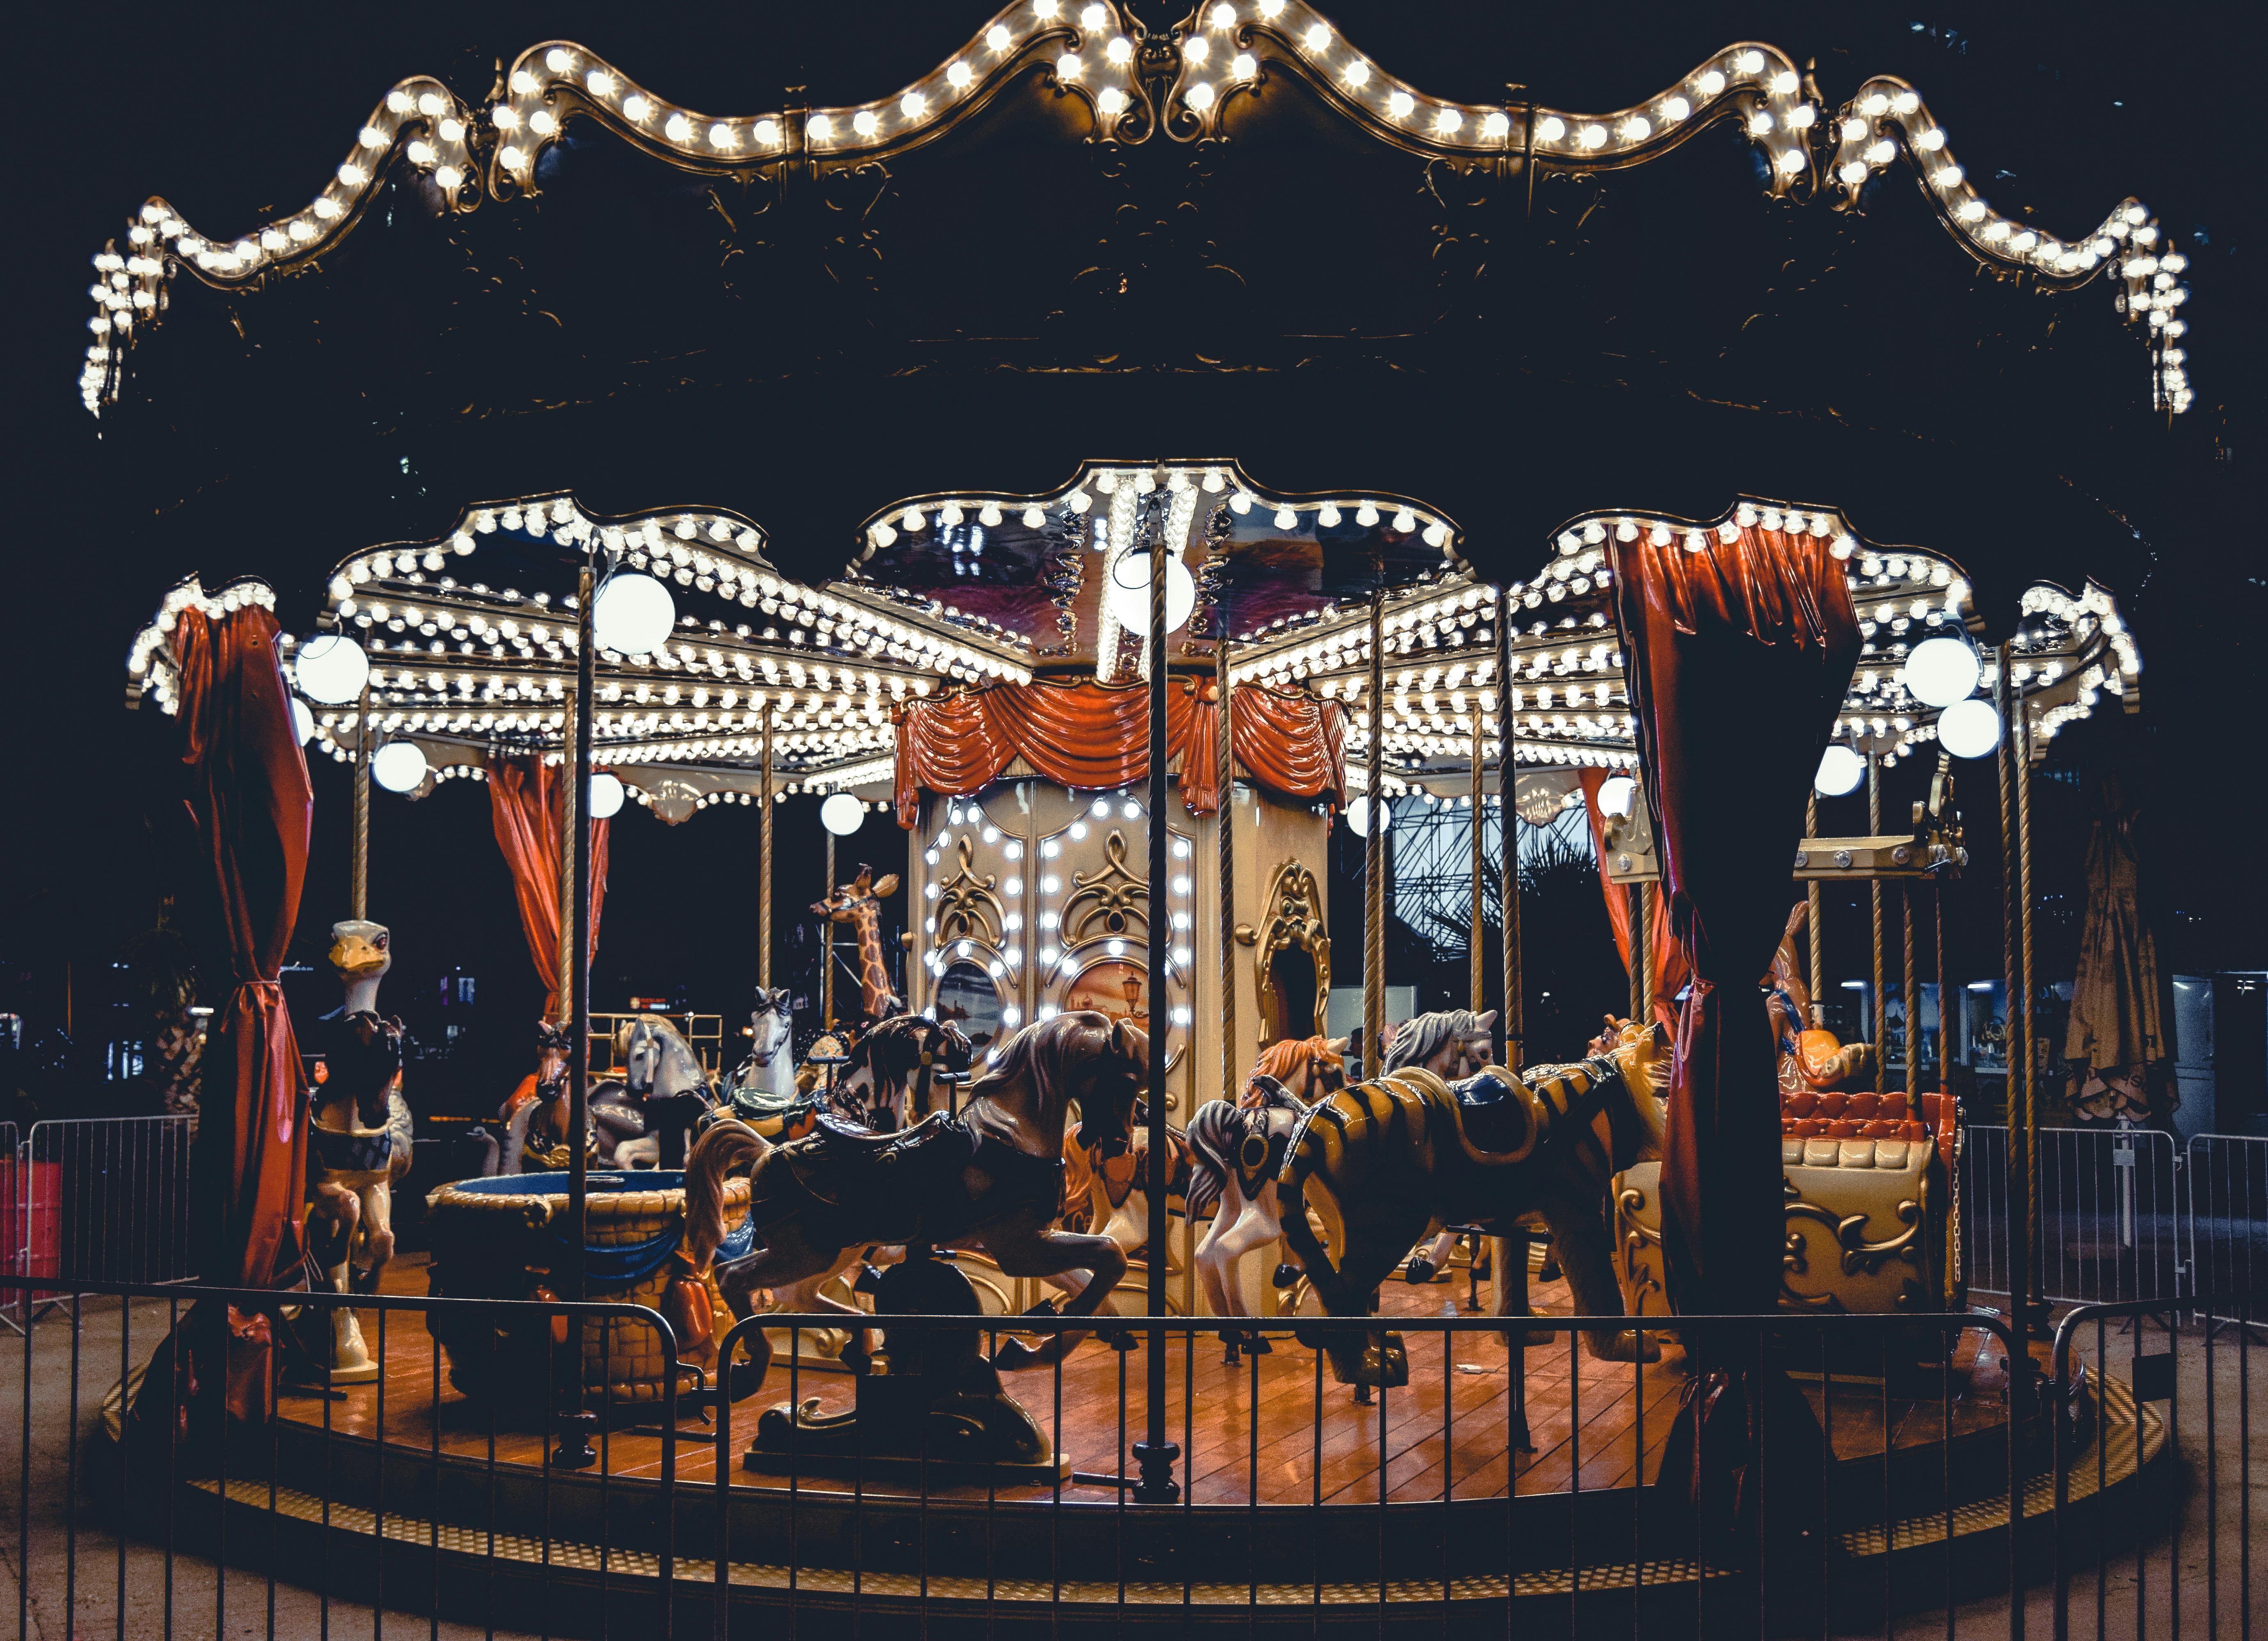 A ride at an amusement park. For illustration purposes only | Source: Pexels